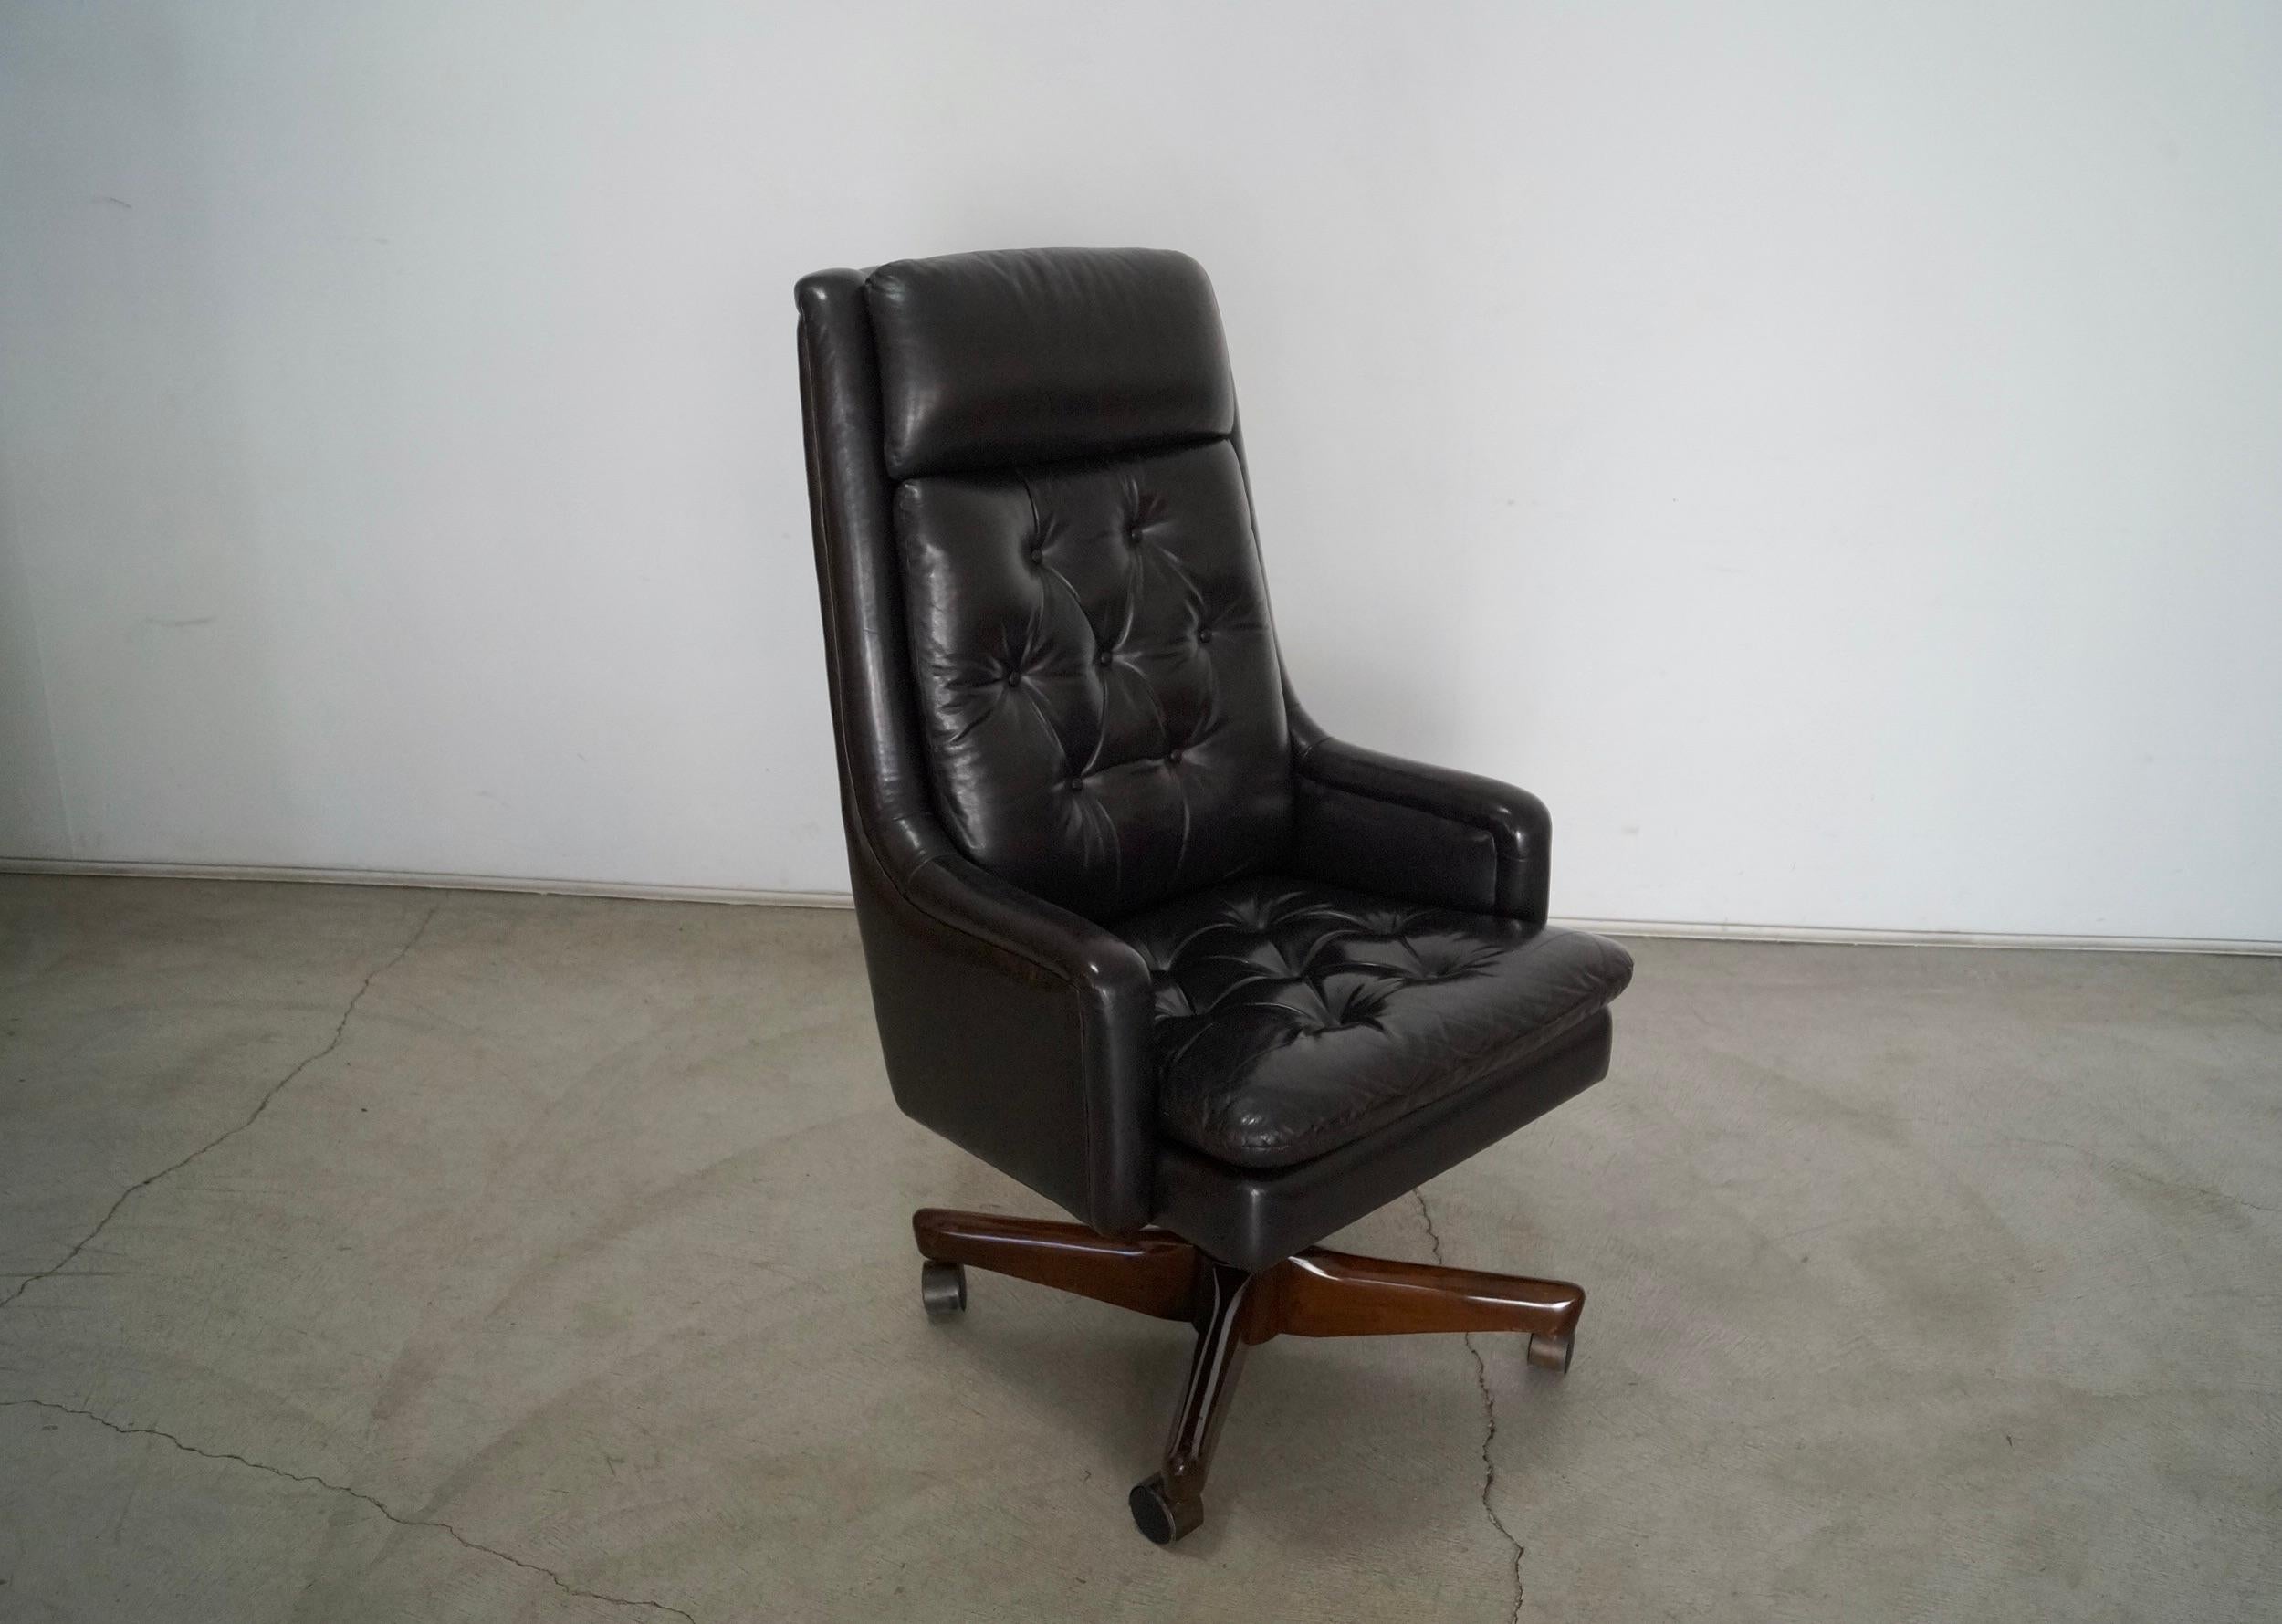 Vintage Tufted Leather Monteverdi-Young Executive Office Desk Chair 4